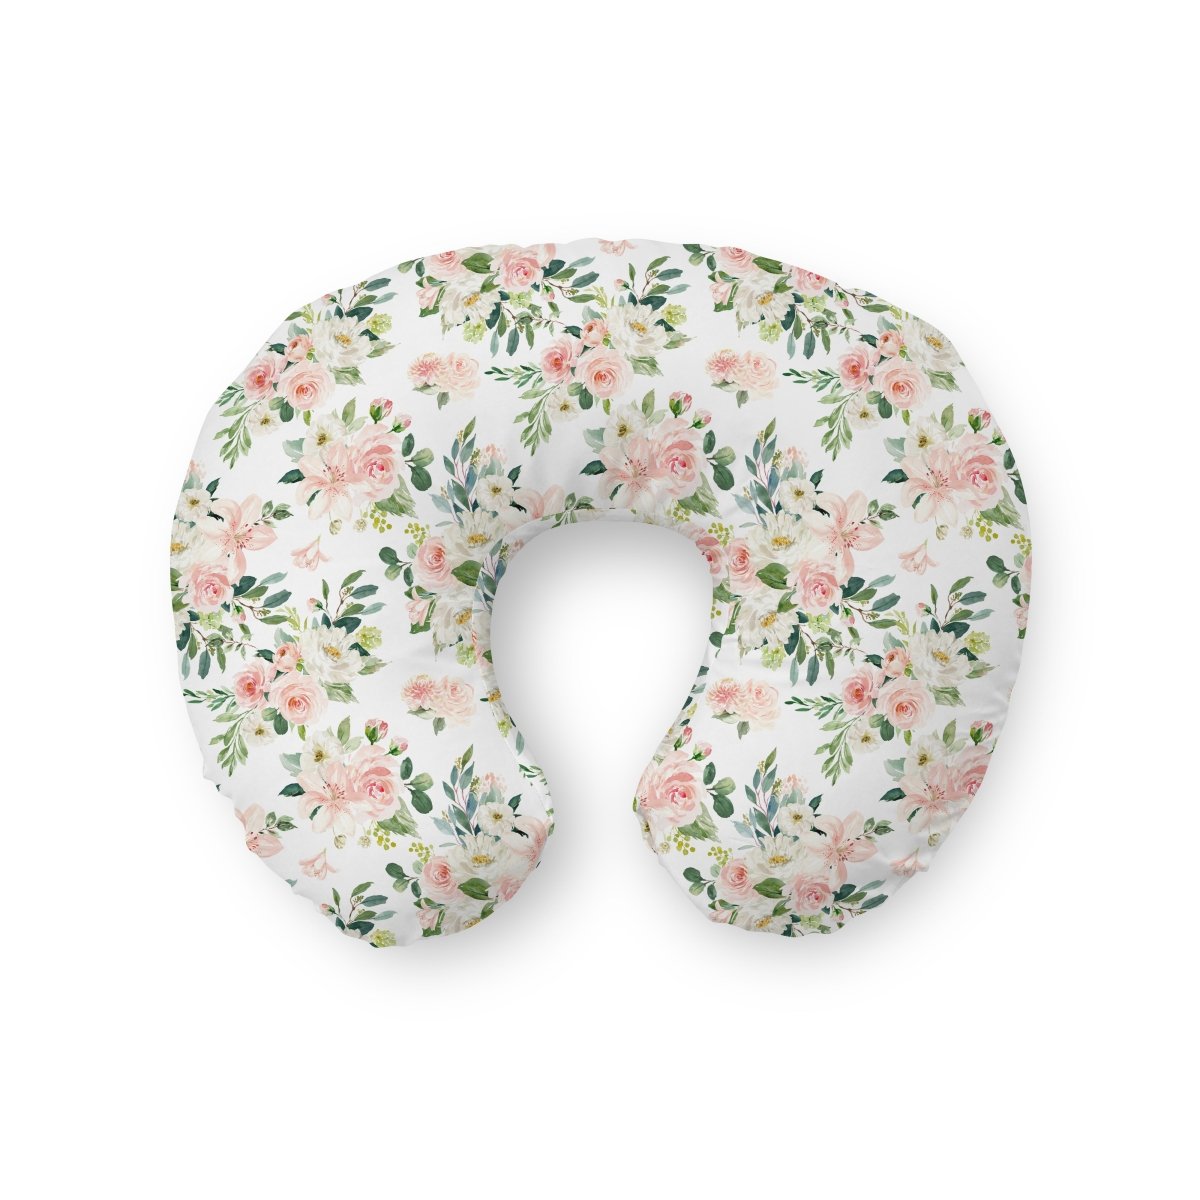 Woodland Meadows Nursing Pillow Cover - gender_girl, Theme_Floral, Theme_Woodland